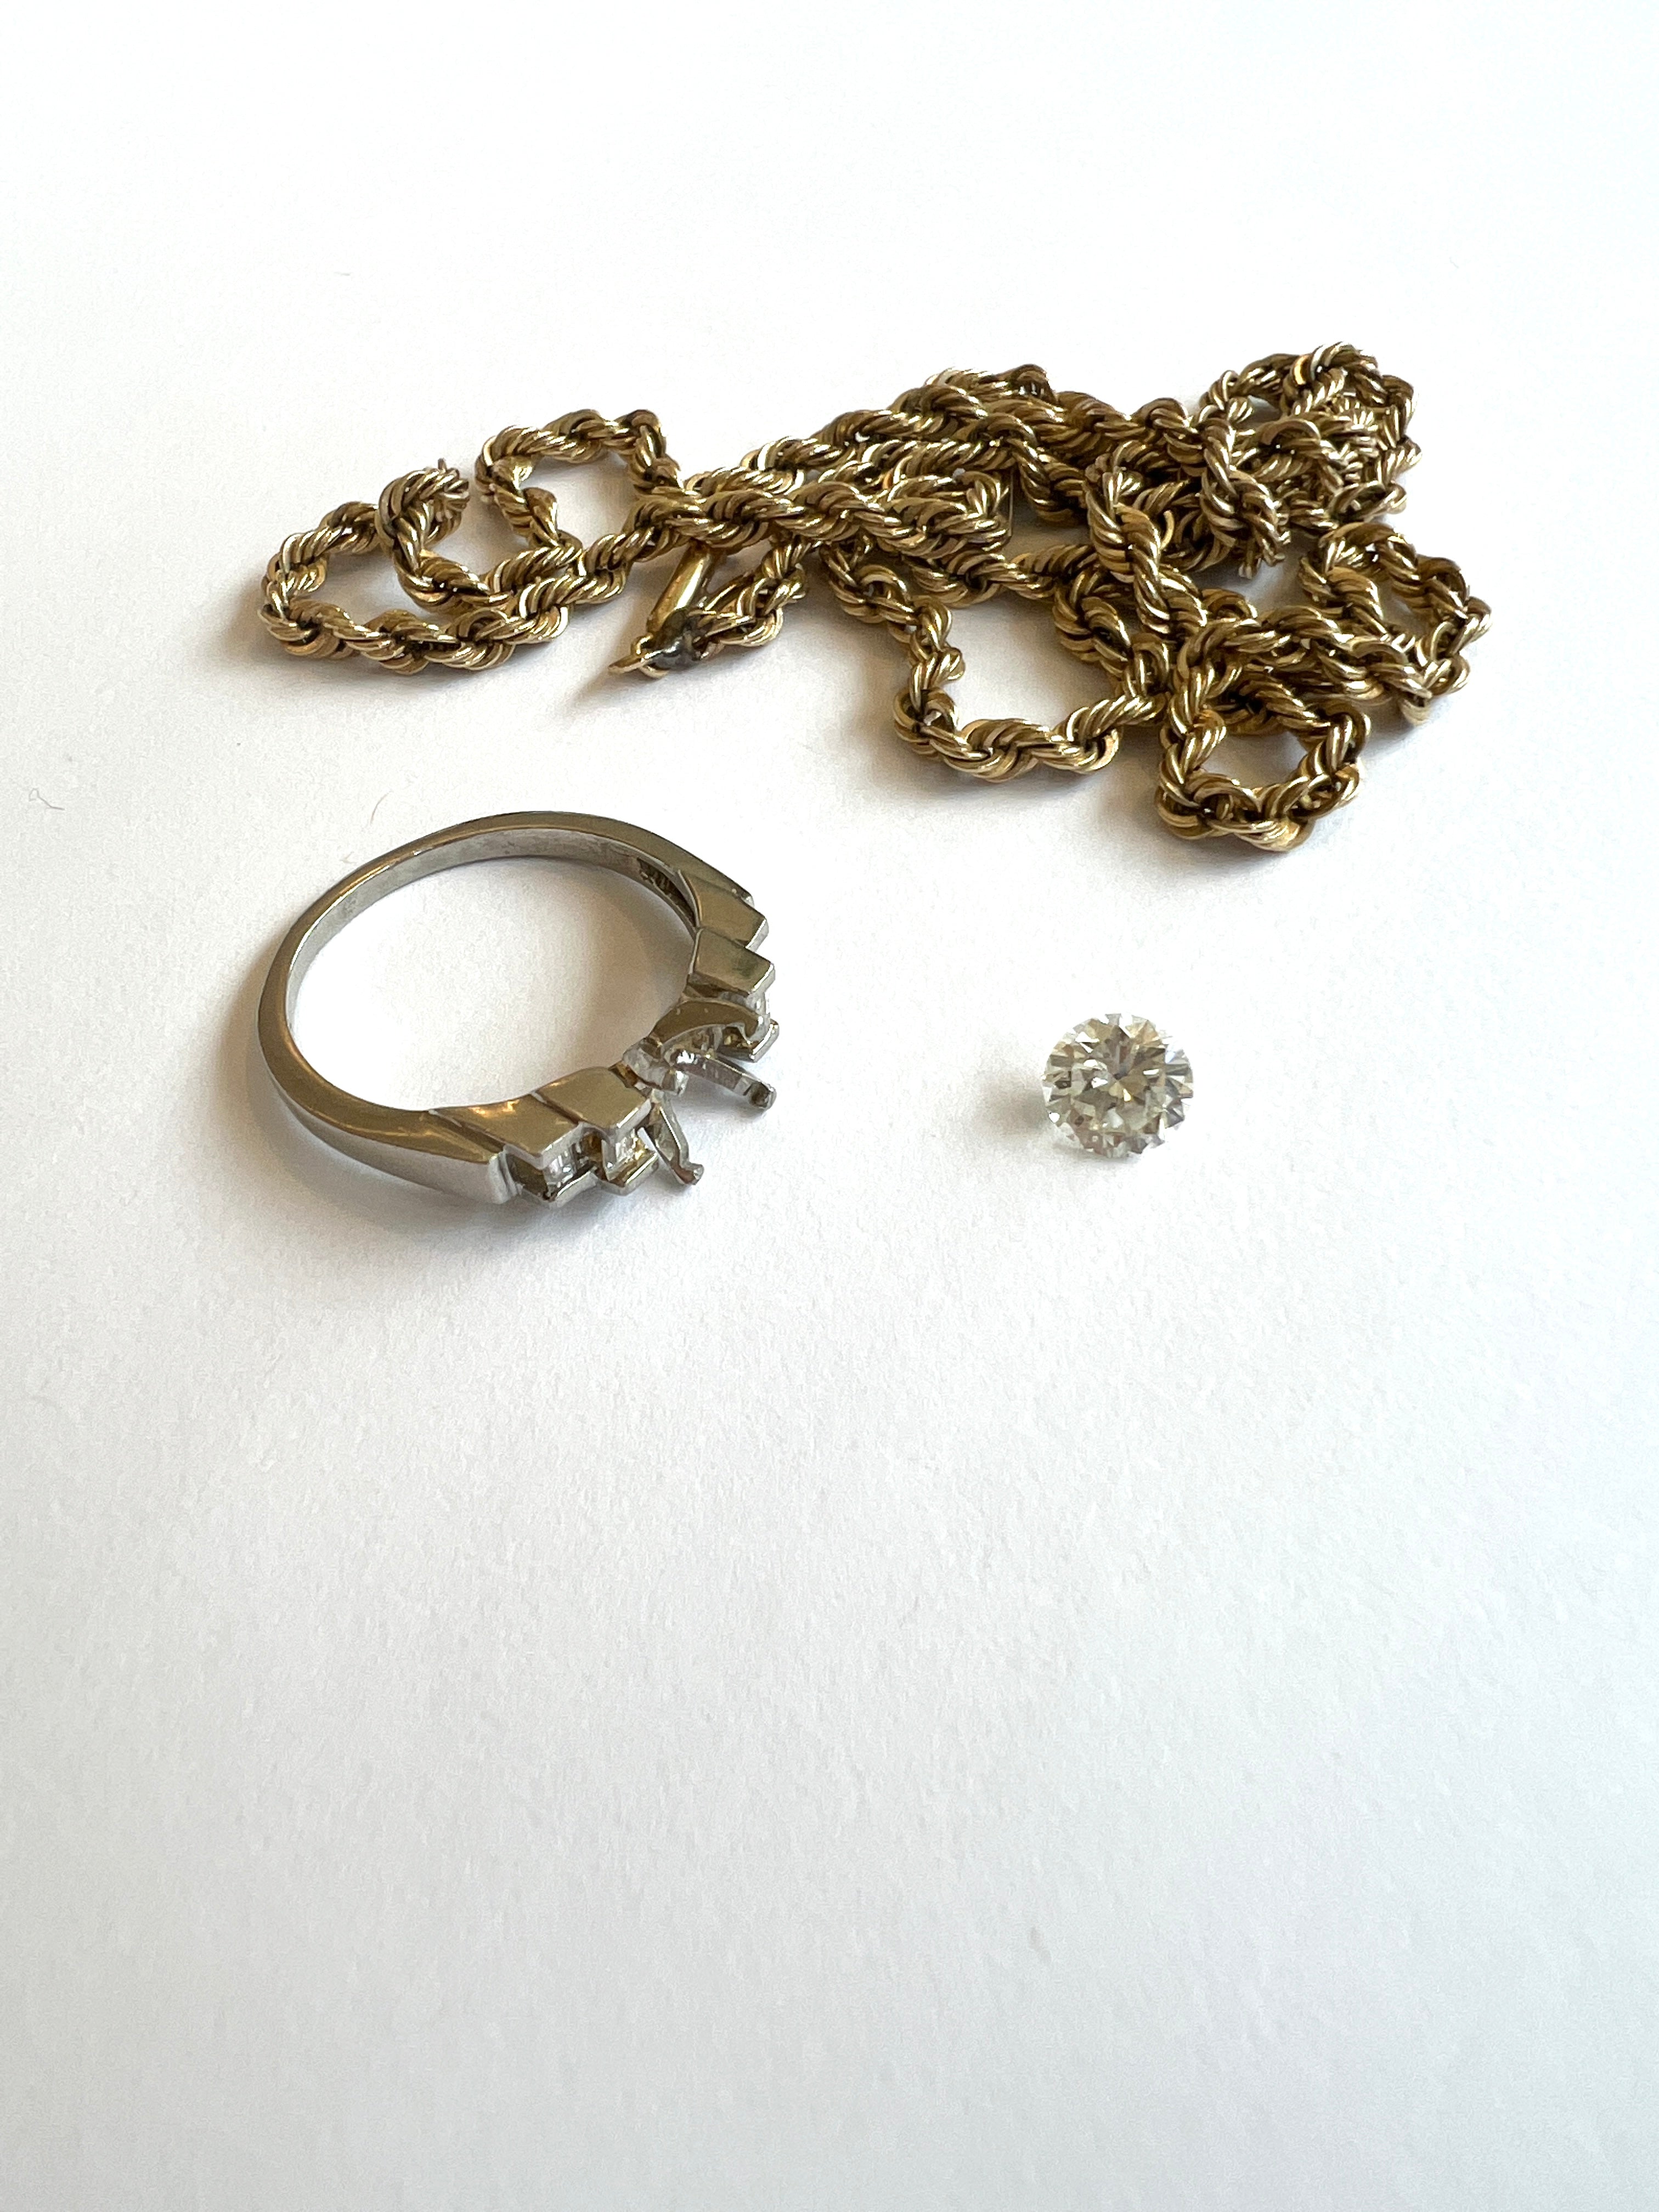 Old ring and jewelry to be recycle